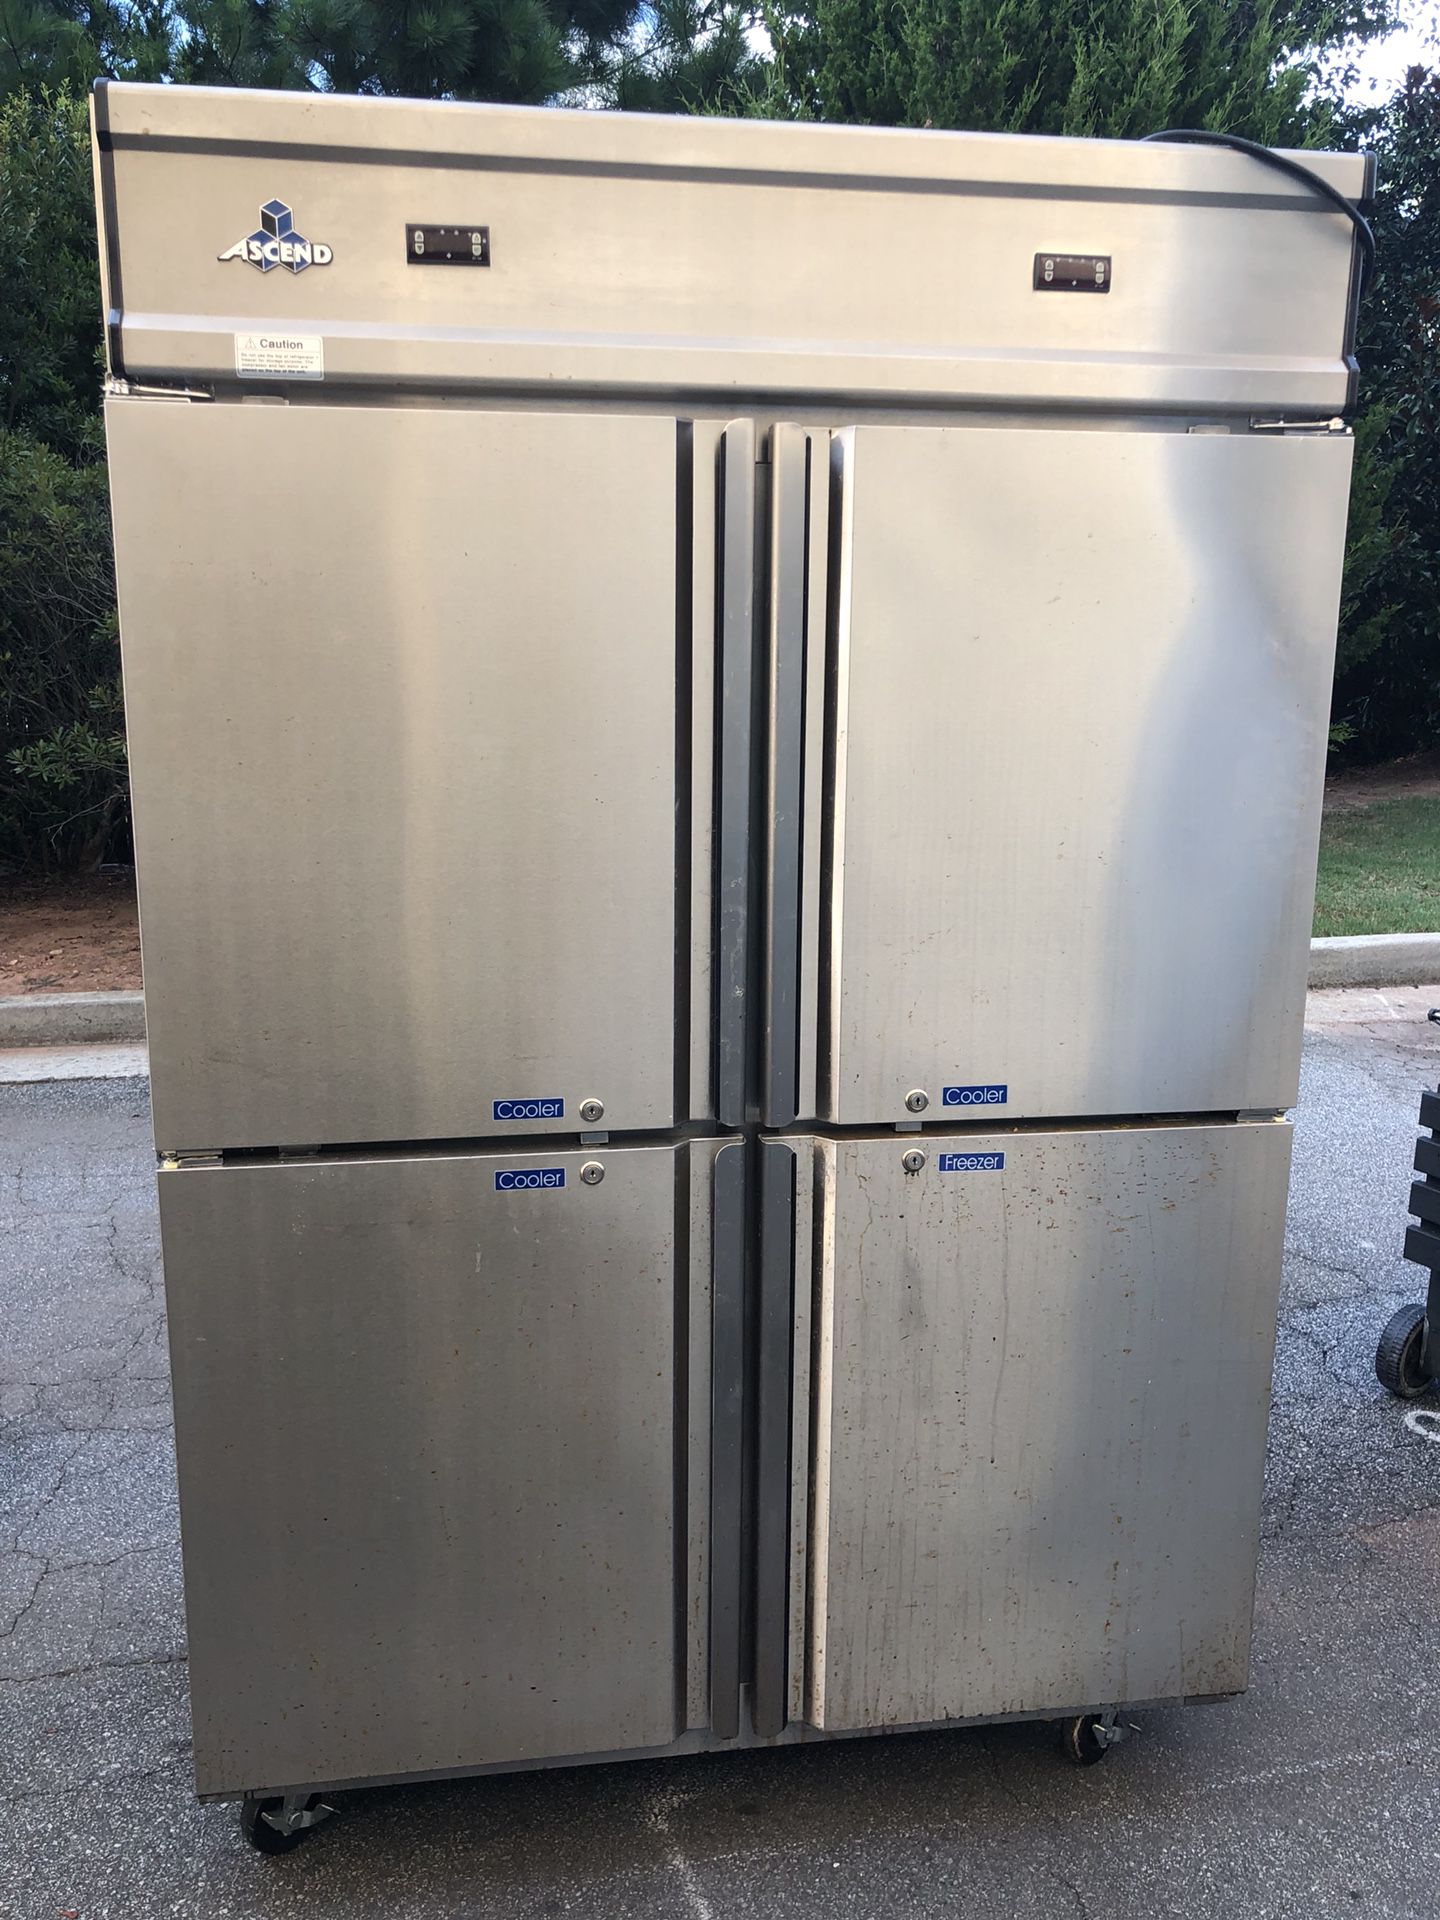 Asend commercial refrigerator